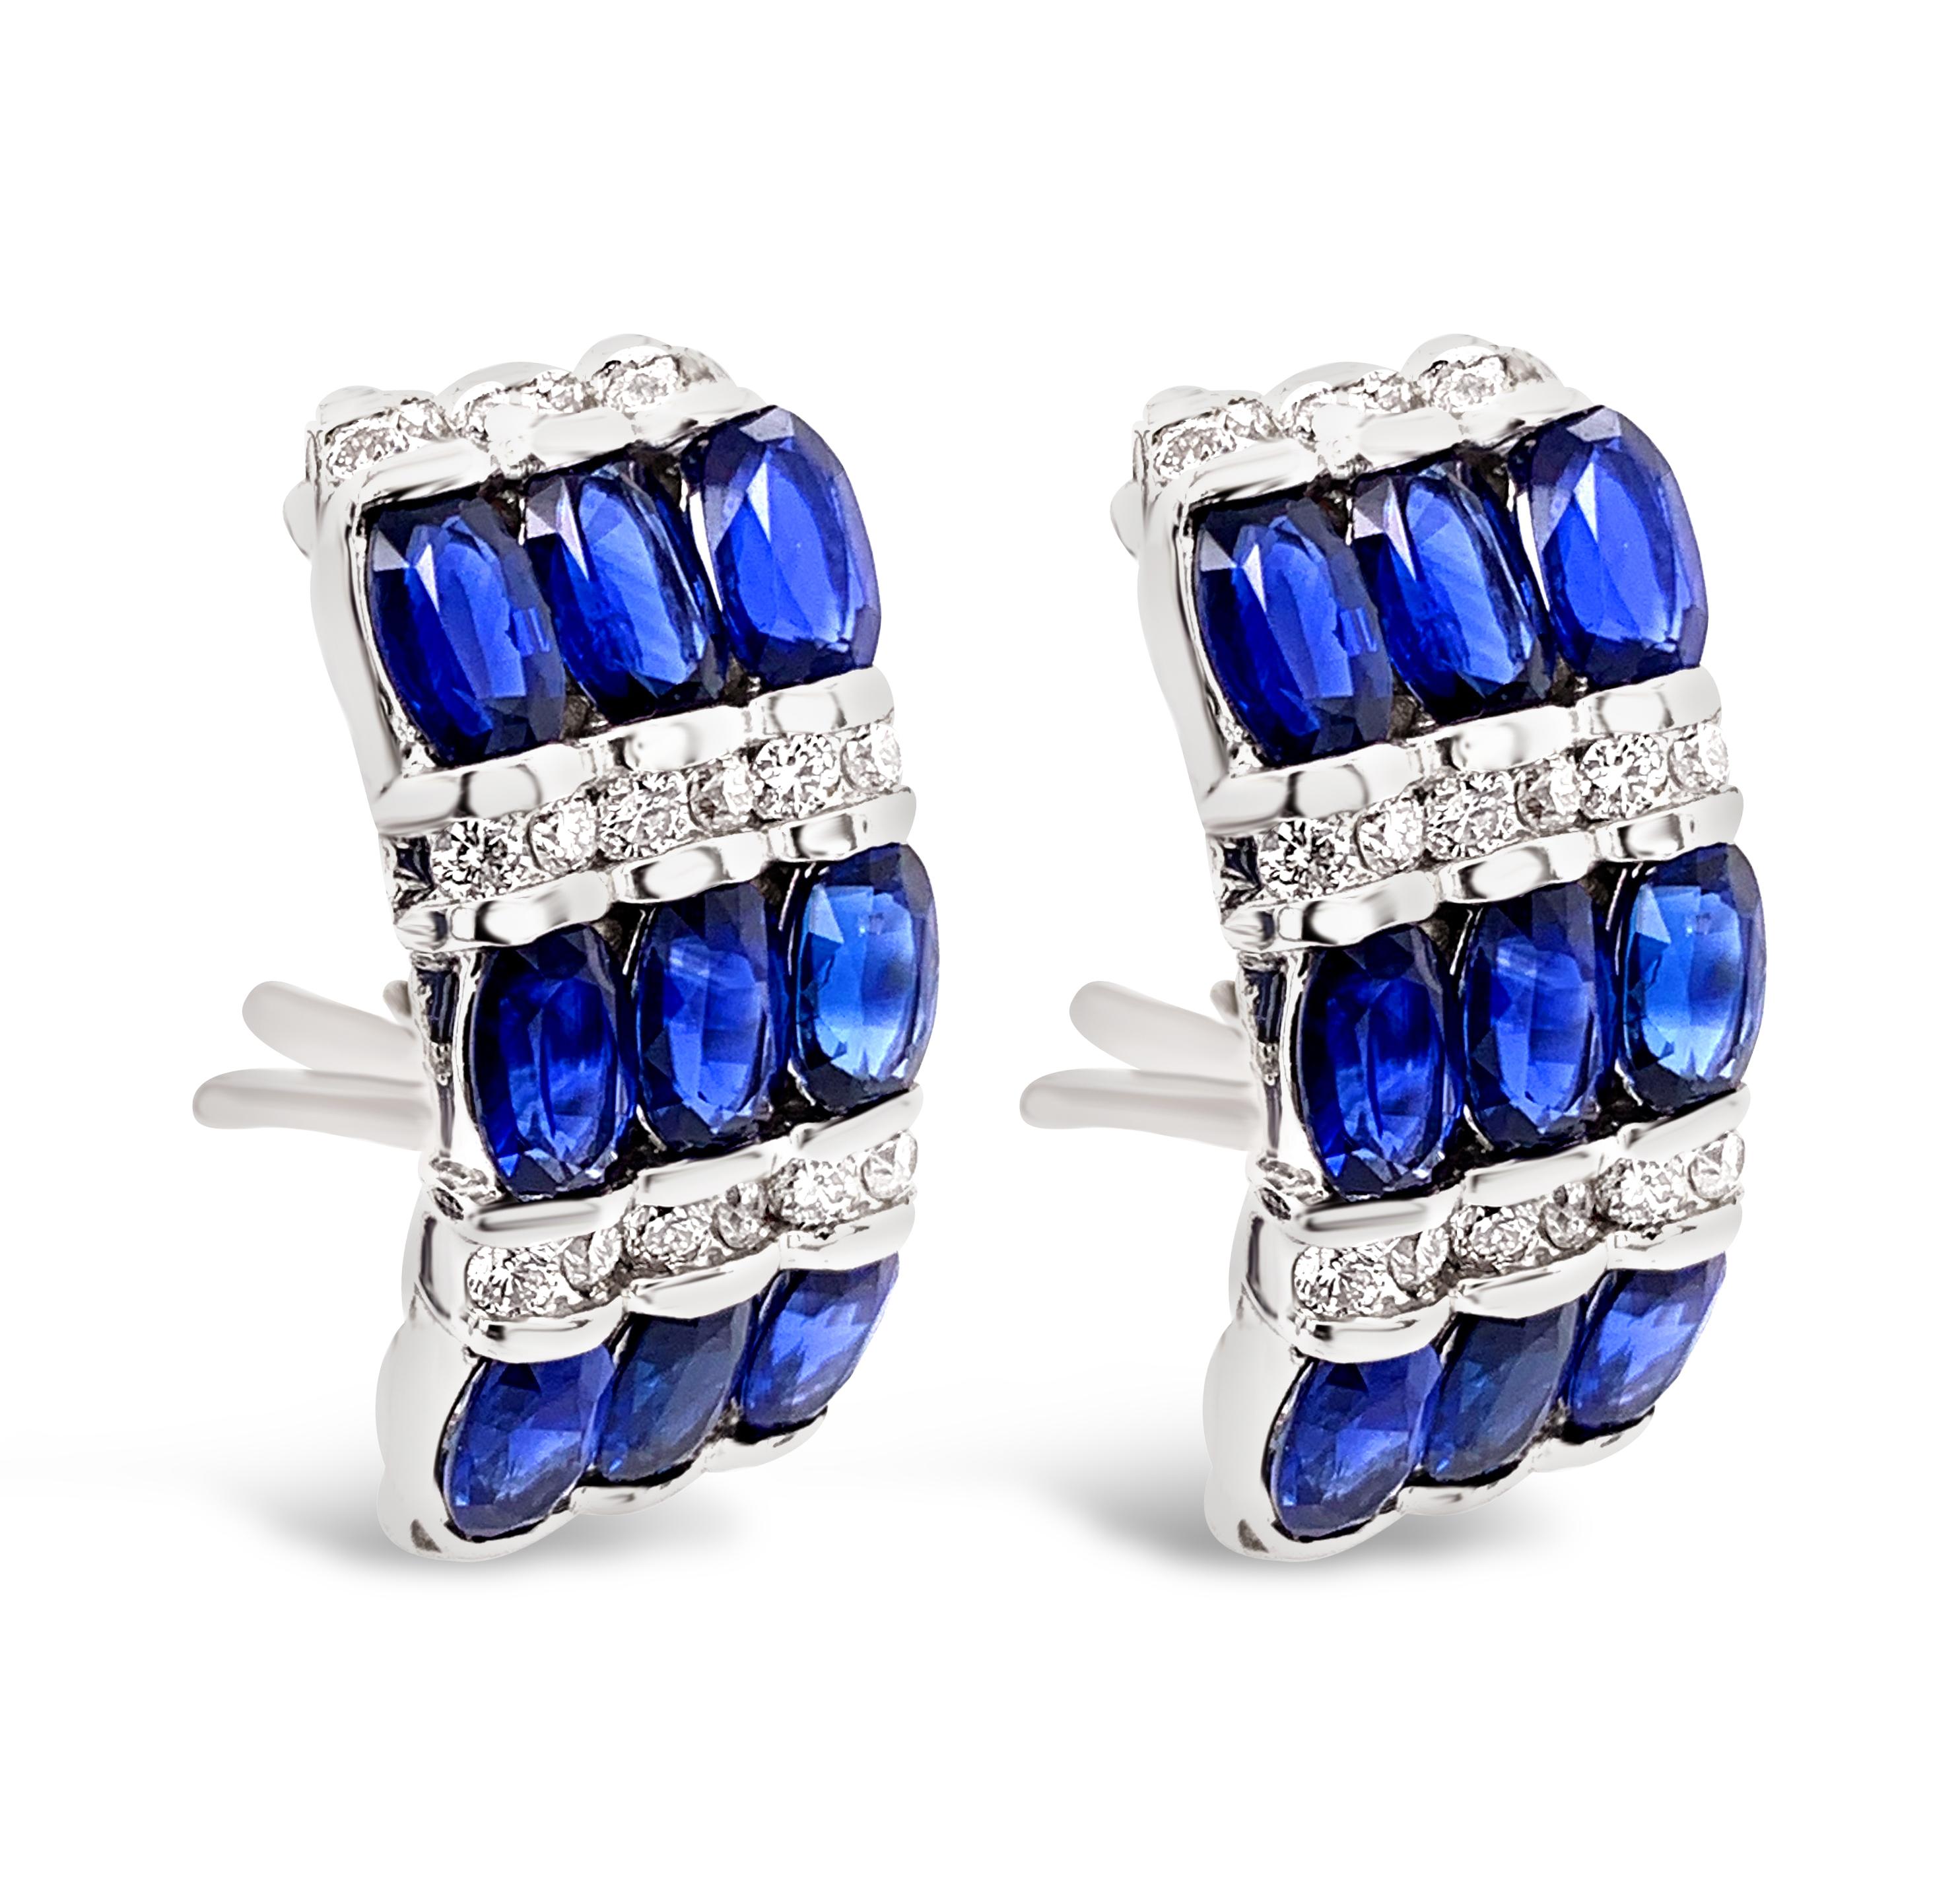 4.91 Carat (total weight) Sapphire and Diamond Earrings in 18K White Gold.  Round brilliant diamonds weigh 0.72 Carat (total weight) with a color grade of H-I and clarity of VS-2-SI-1.  The earrings measure 21.0mm in length and 9.5mm wide and have